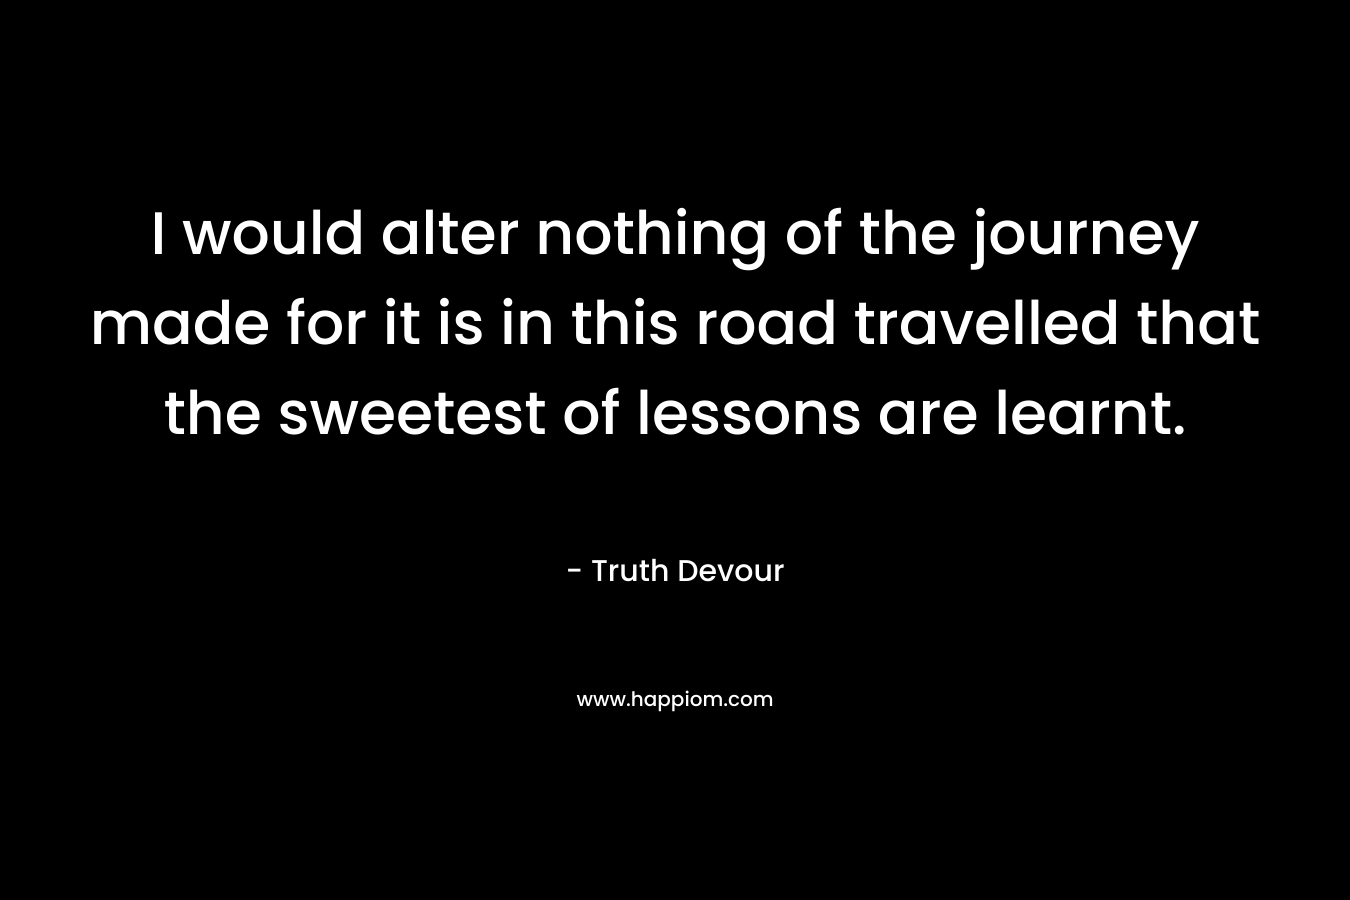 I would alter nothing of the journey made for it is in this road travelled that the sweetest of lessons are learnt.